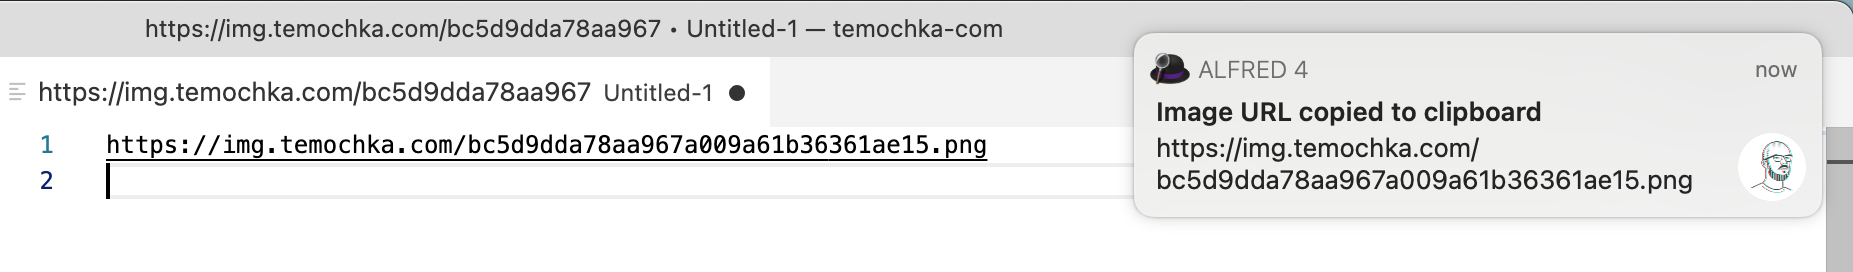 Text showing an image URL alongside a macOS notification reading “Image URL copied to clipboard”